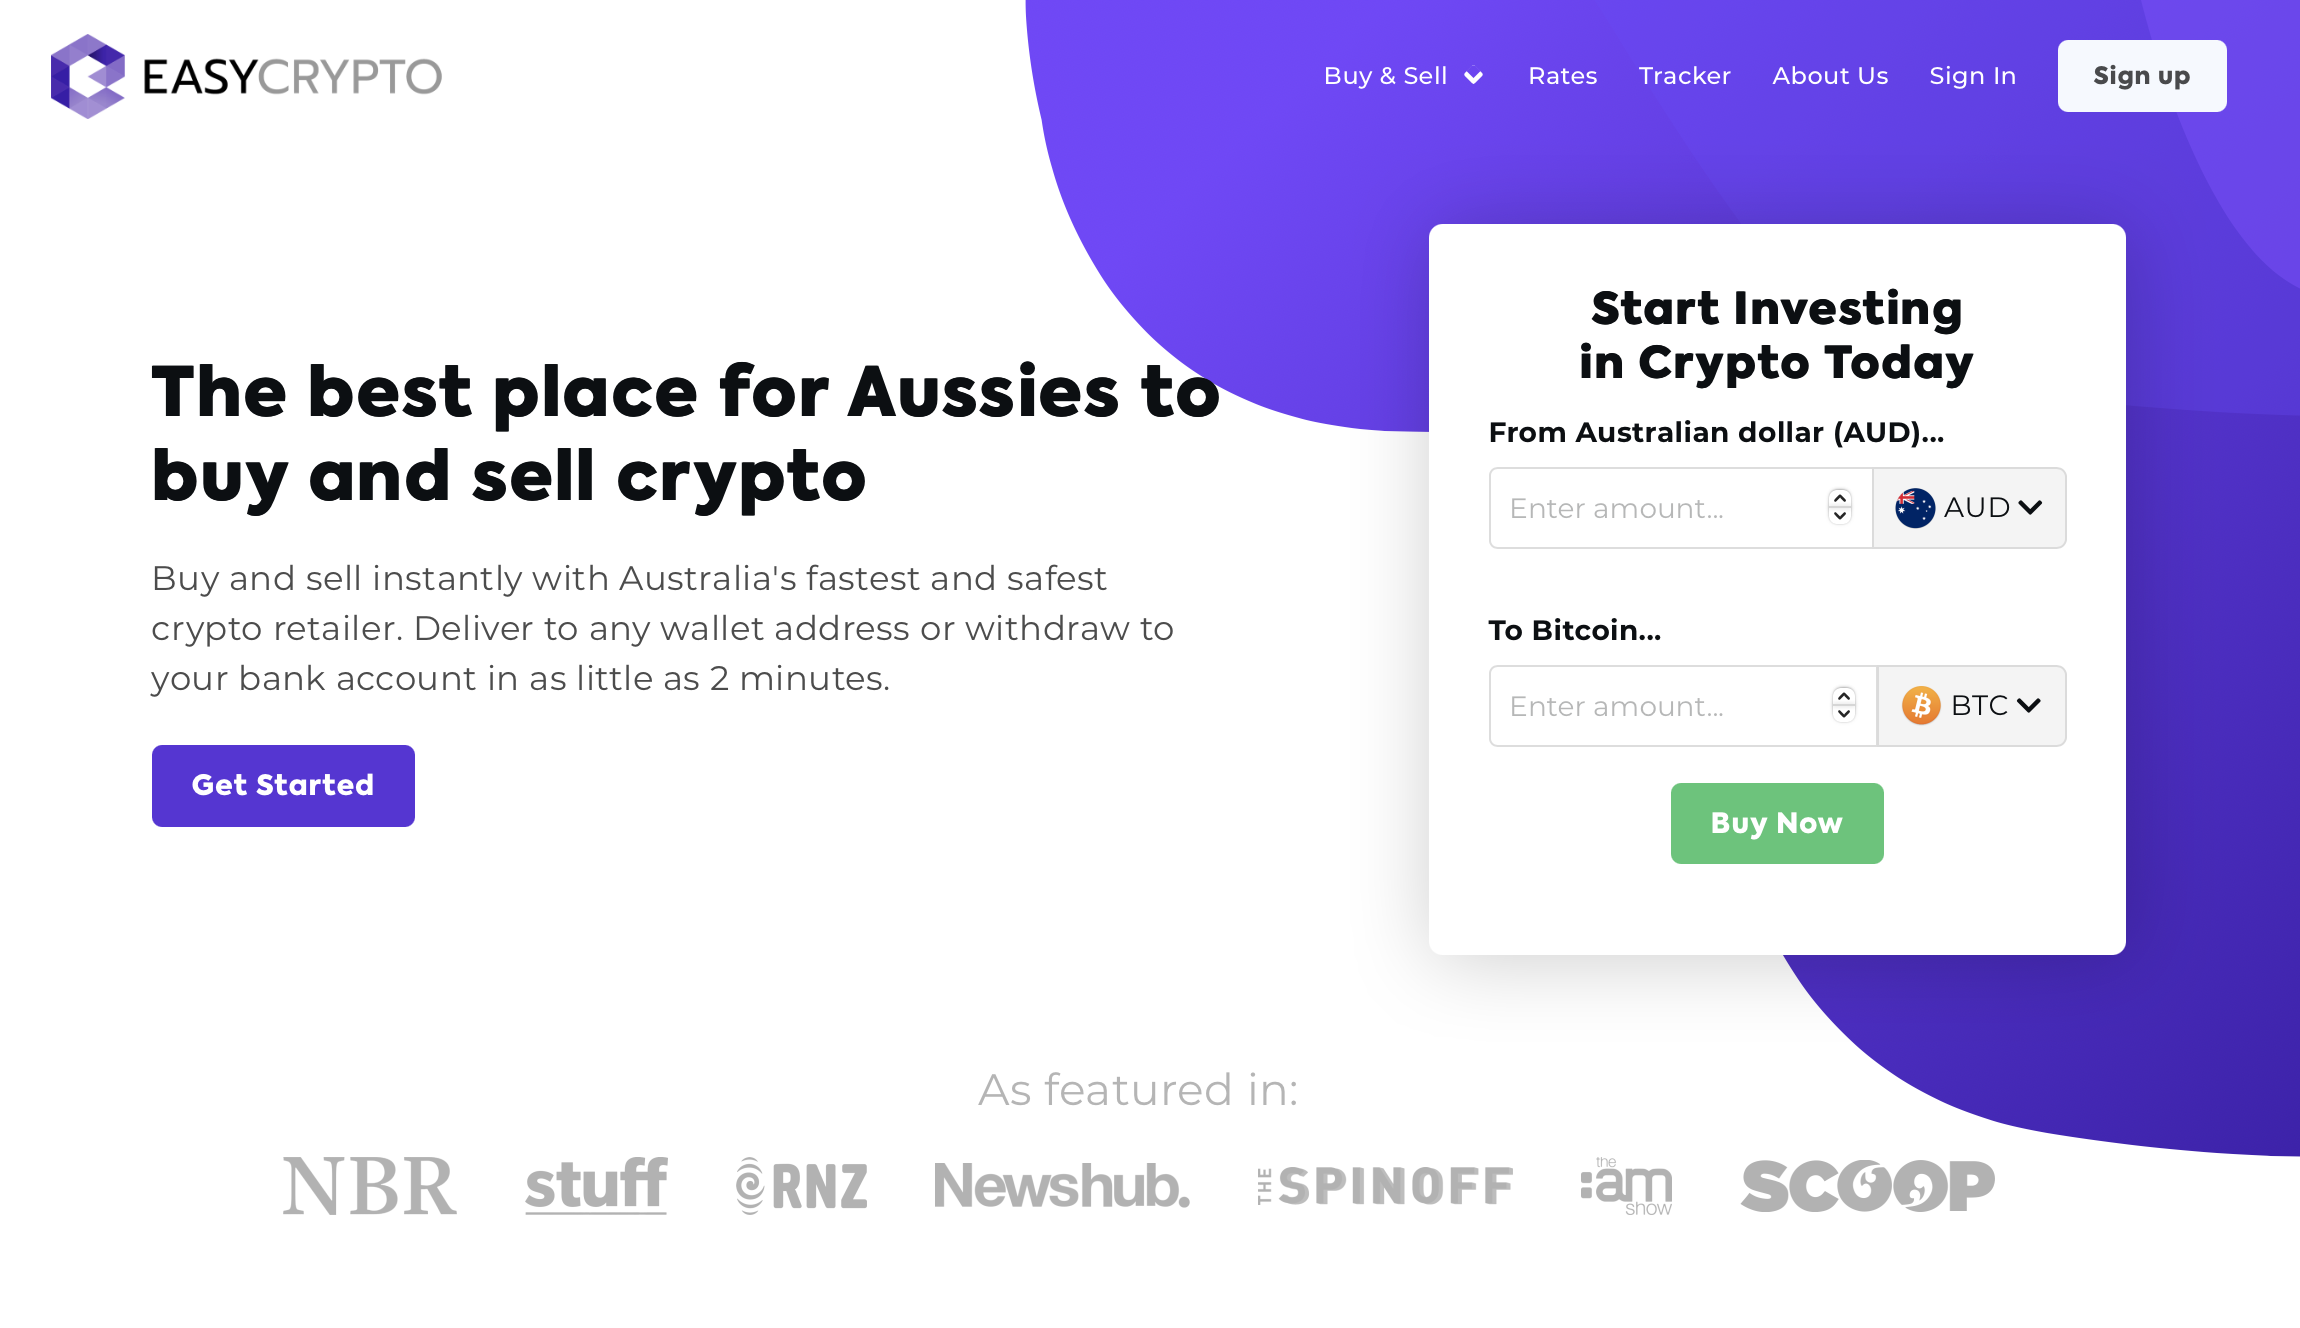 Easy Crypto is the best place for Aussies to buy and sell crypto